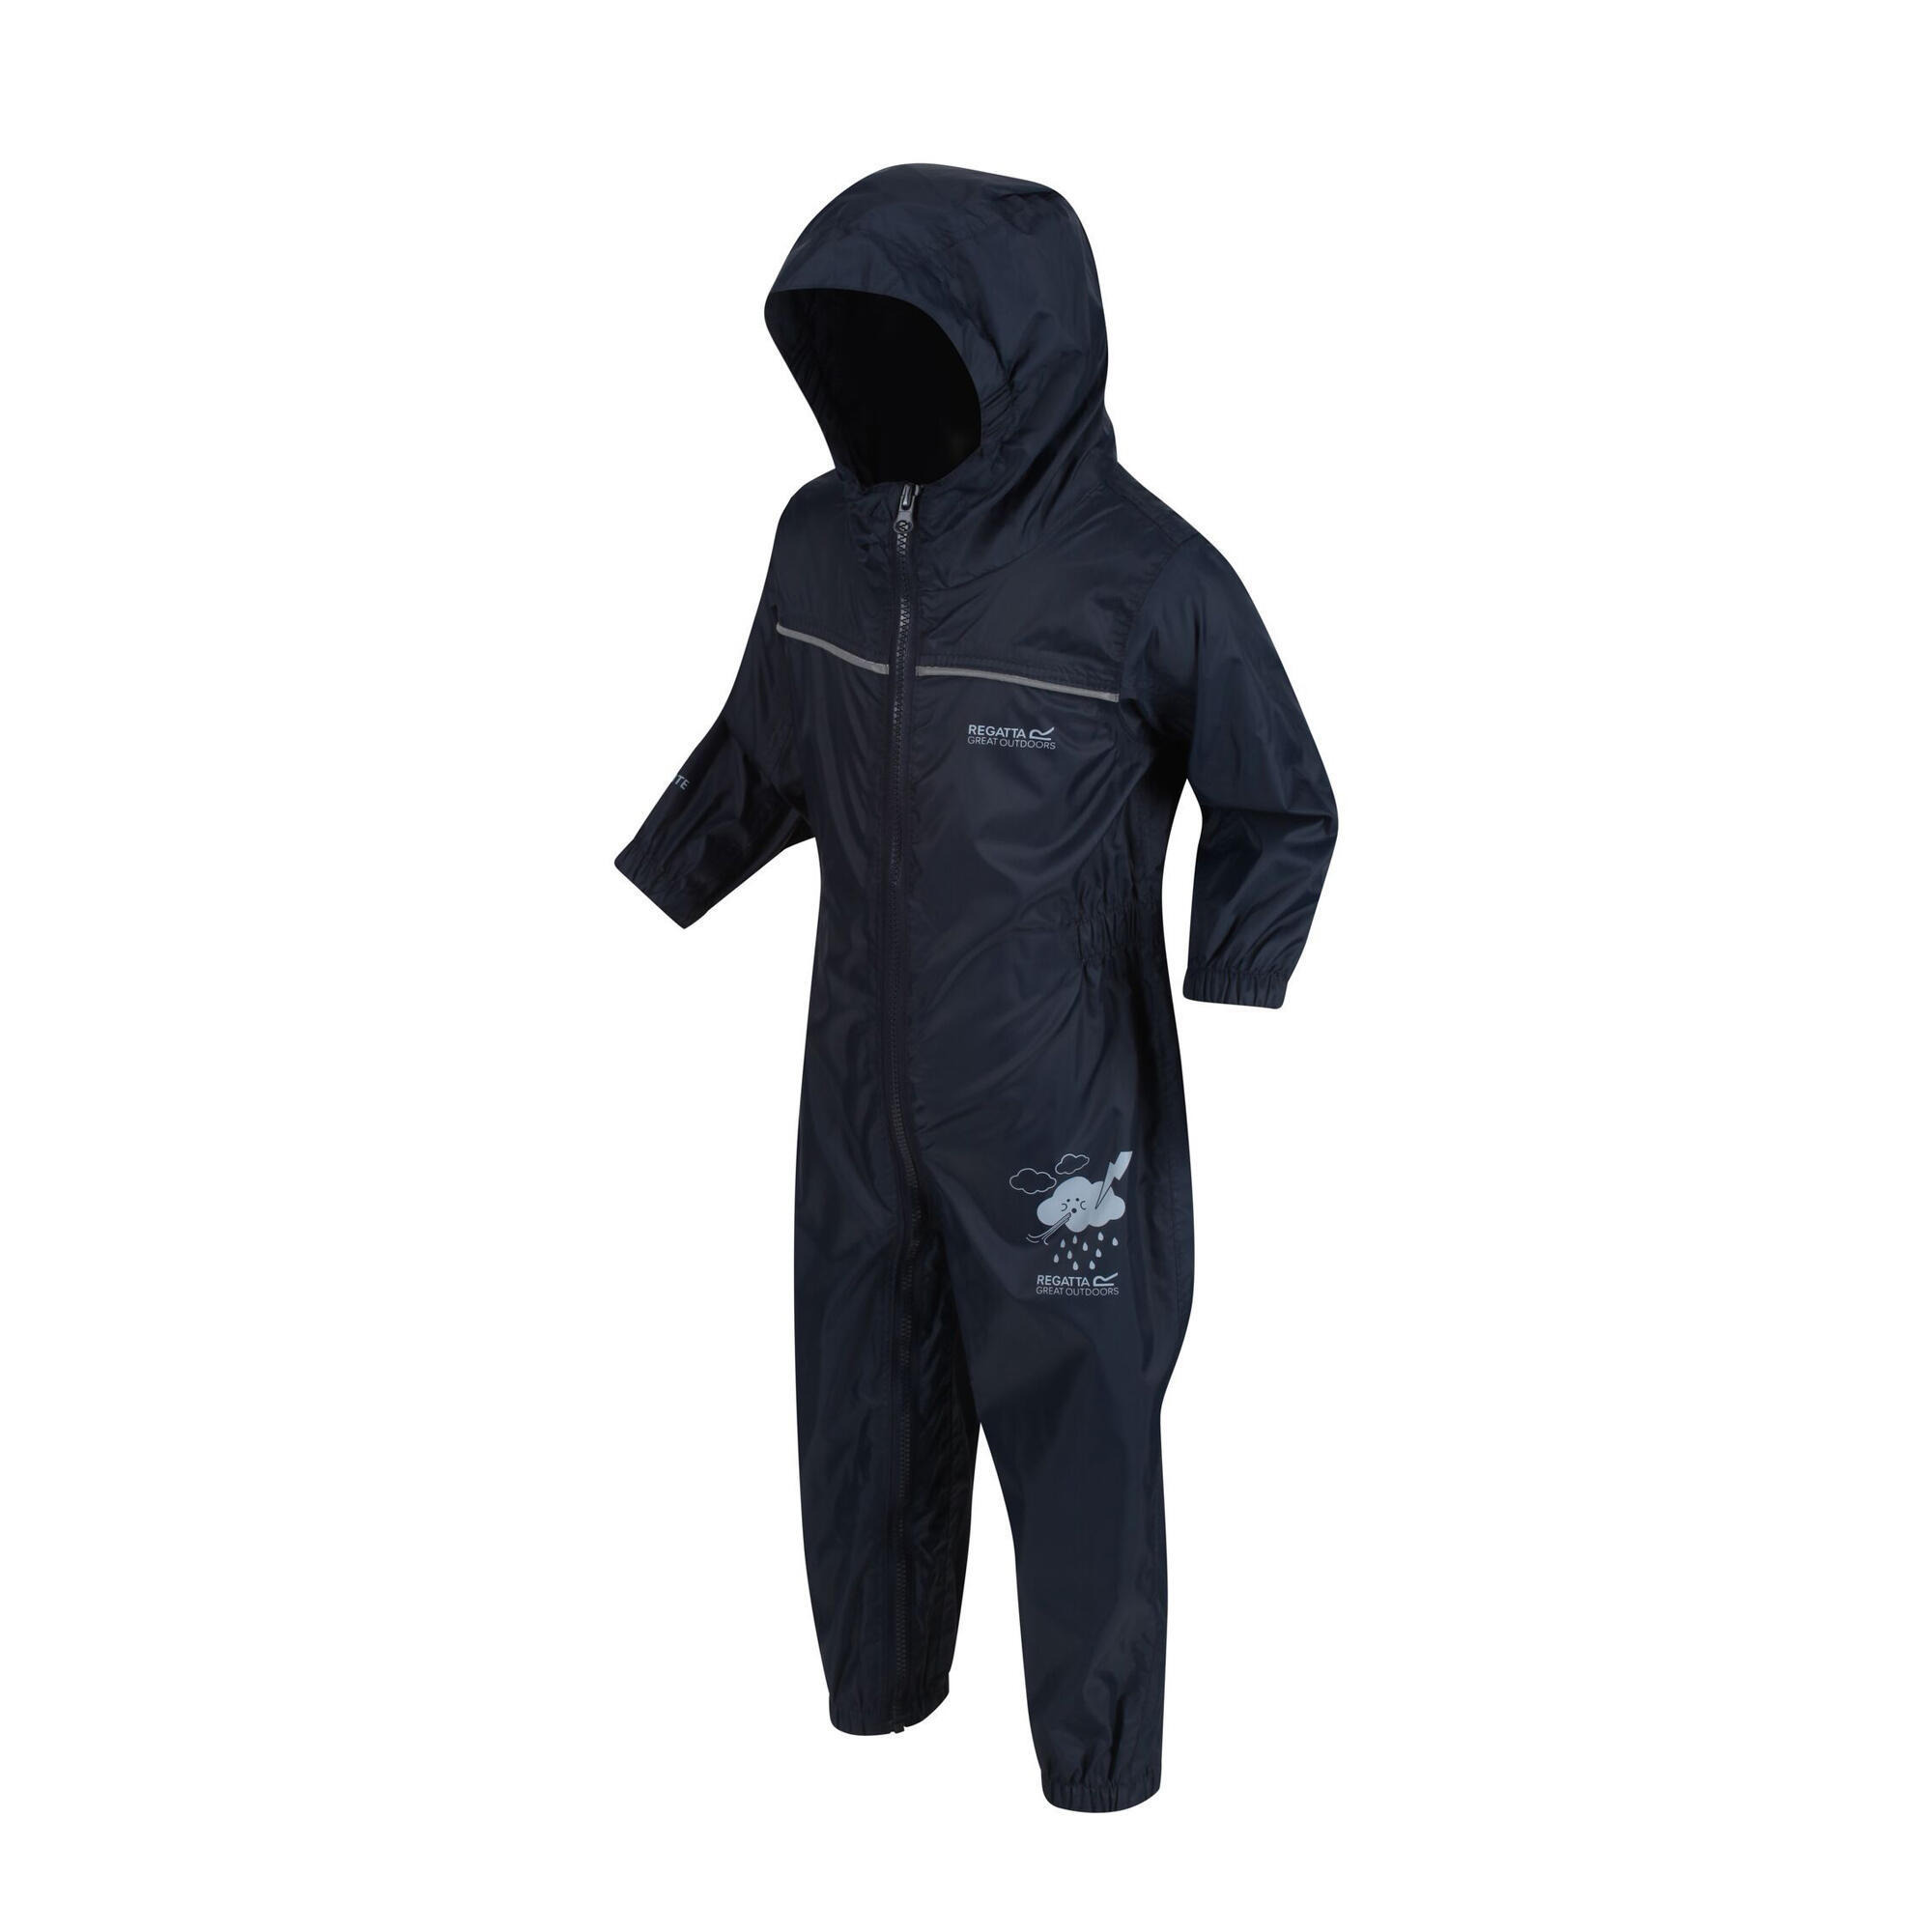 Great Outdoors Childrens Toddlers Puddle IV Waterproof Rainsuit (Navy) 4/5